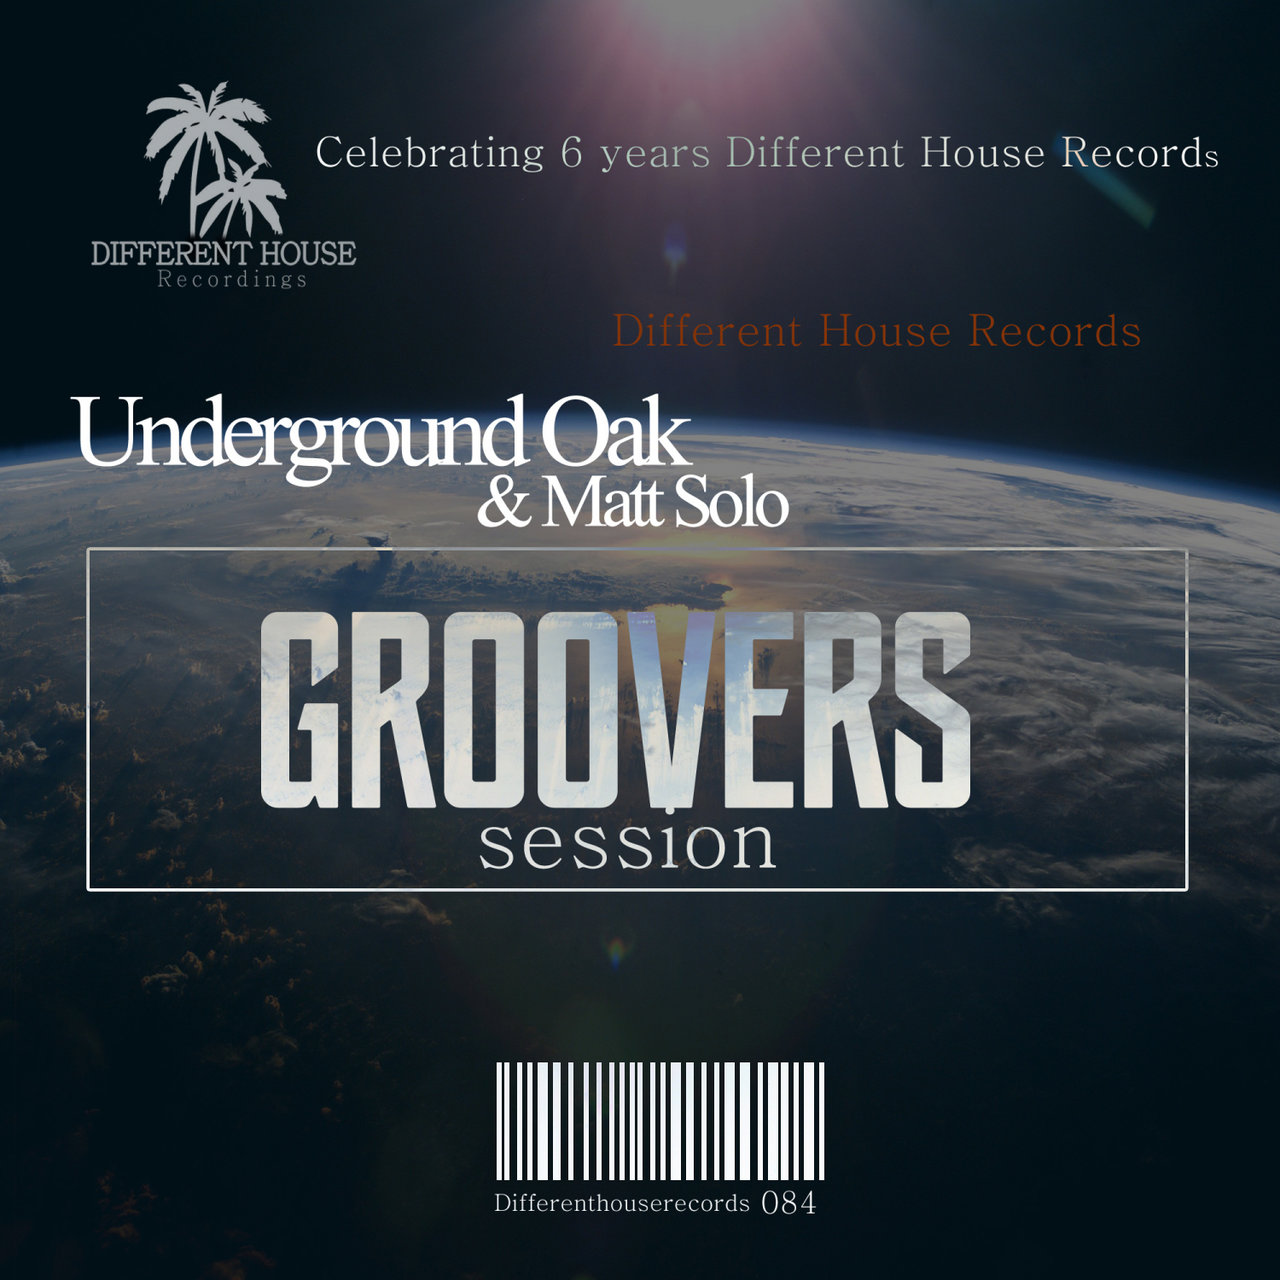 Underground_Oak - Groovers Session / DH Soul Claps Inc.